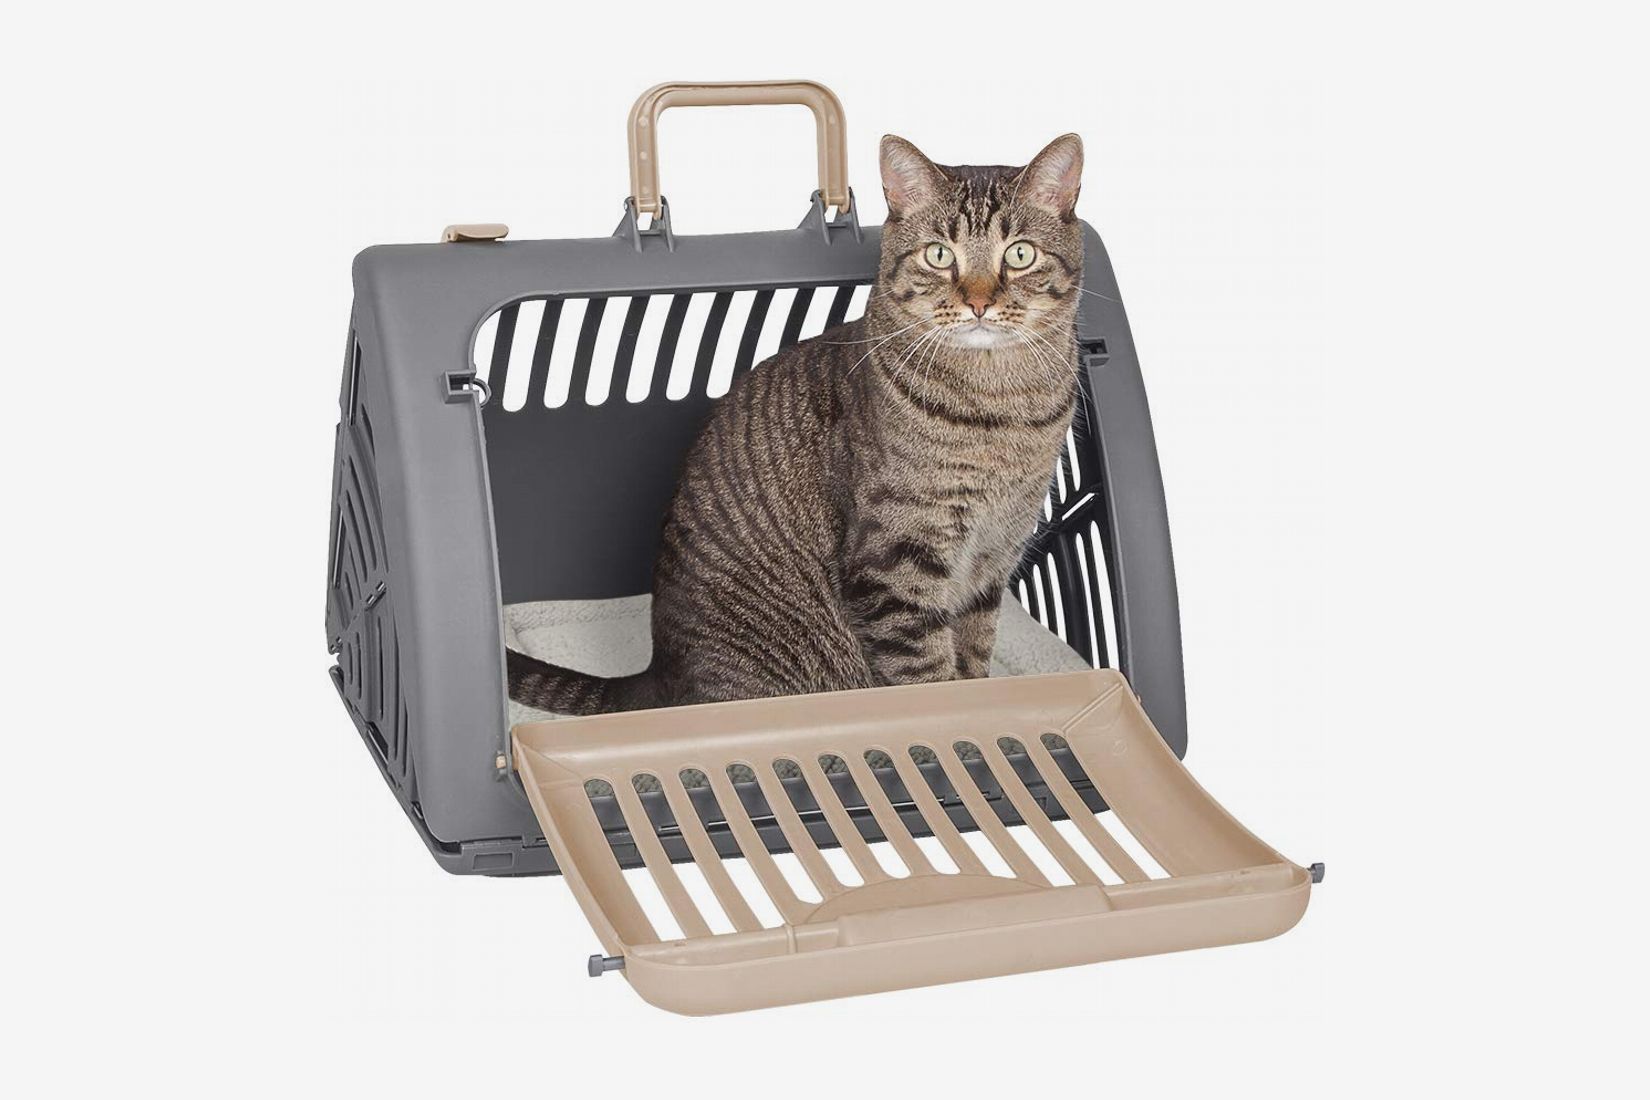 Large Pet Dog Cat Portable Travel Carry Carrier Tote Cage Bag Crates Box Holder